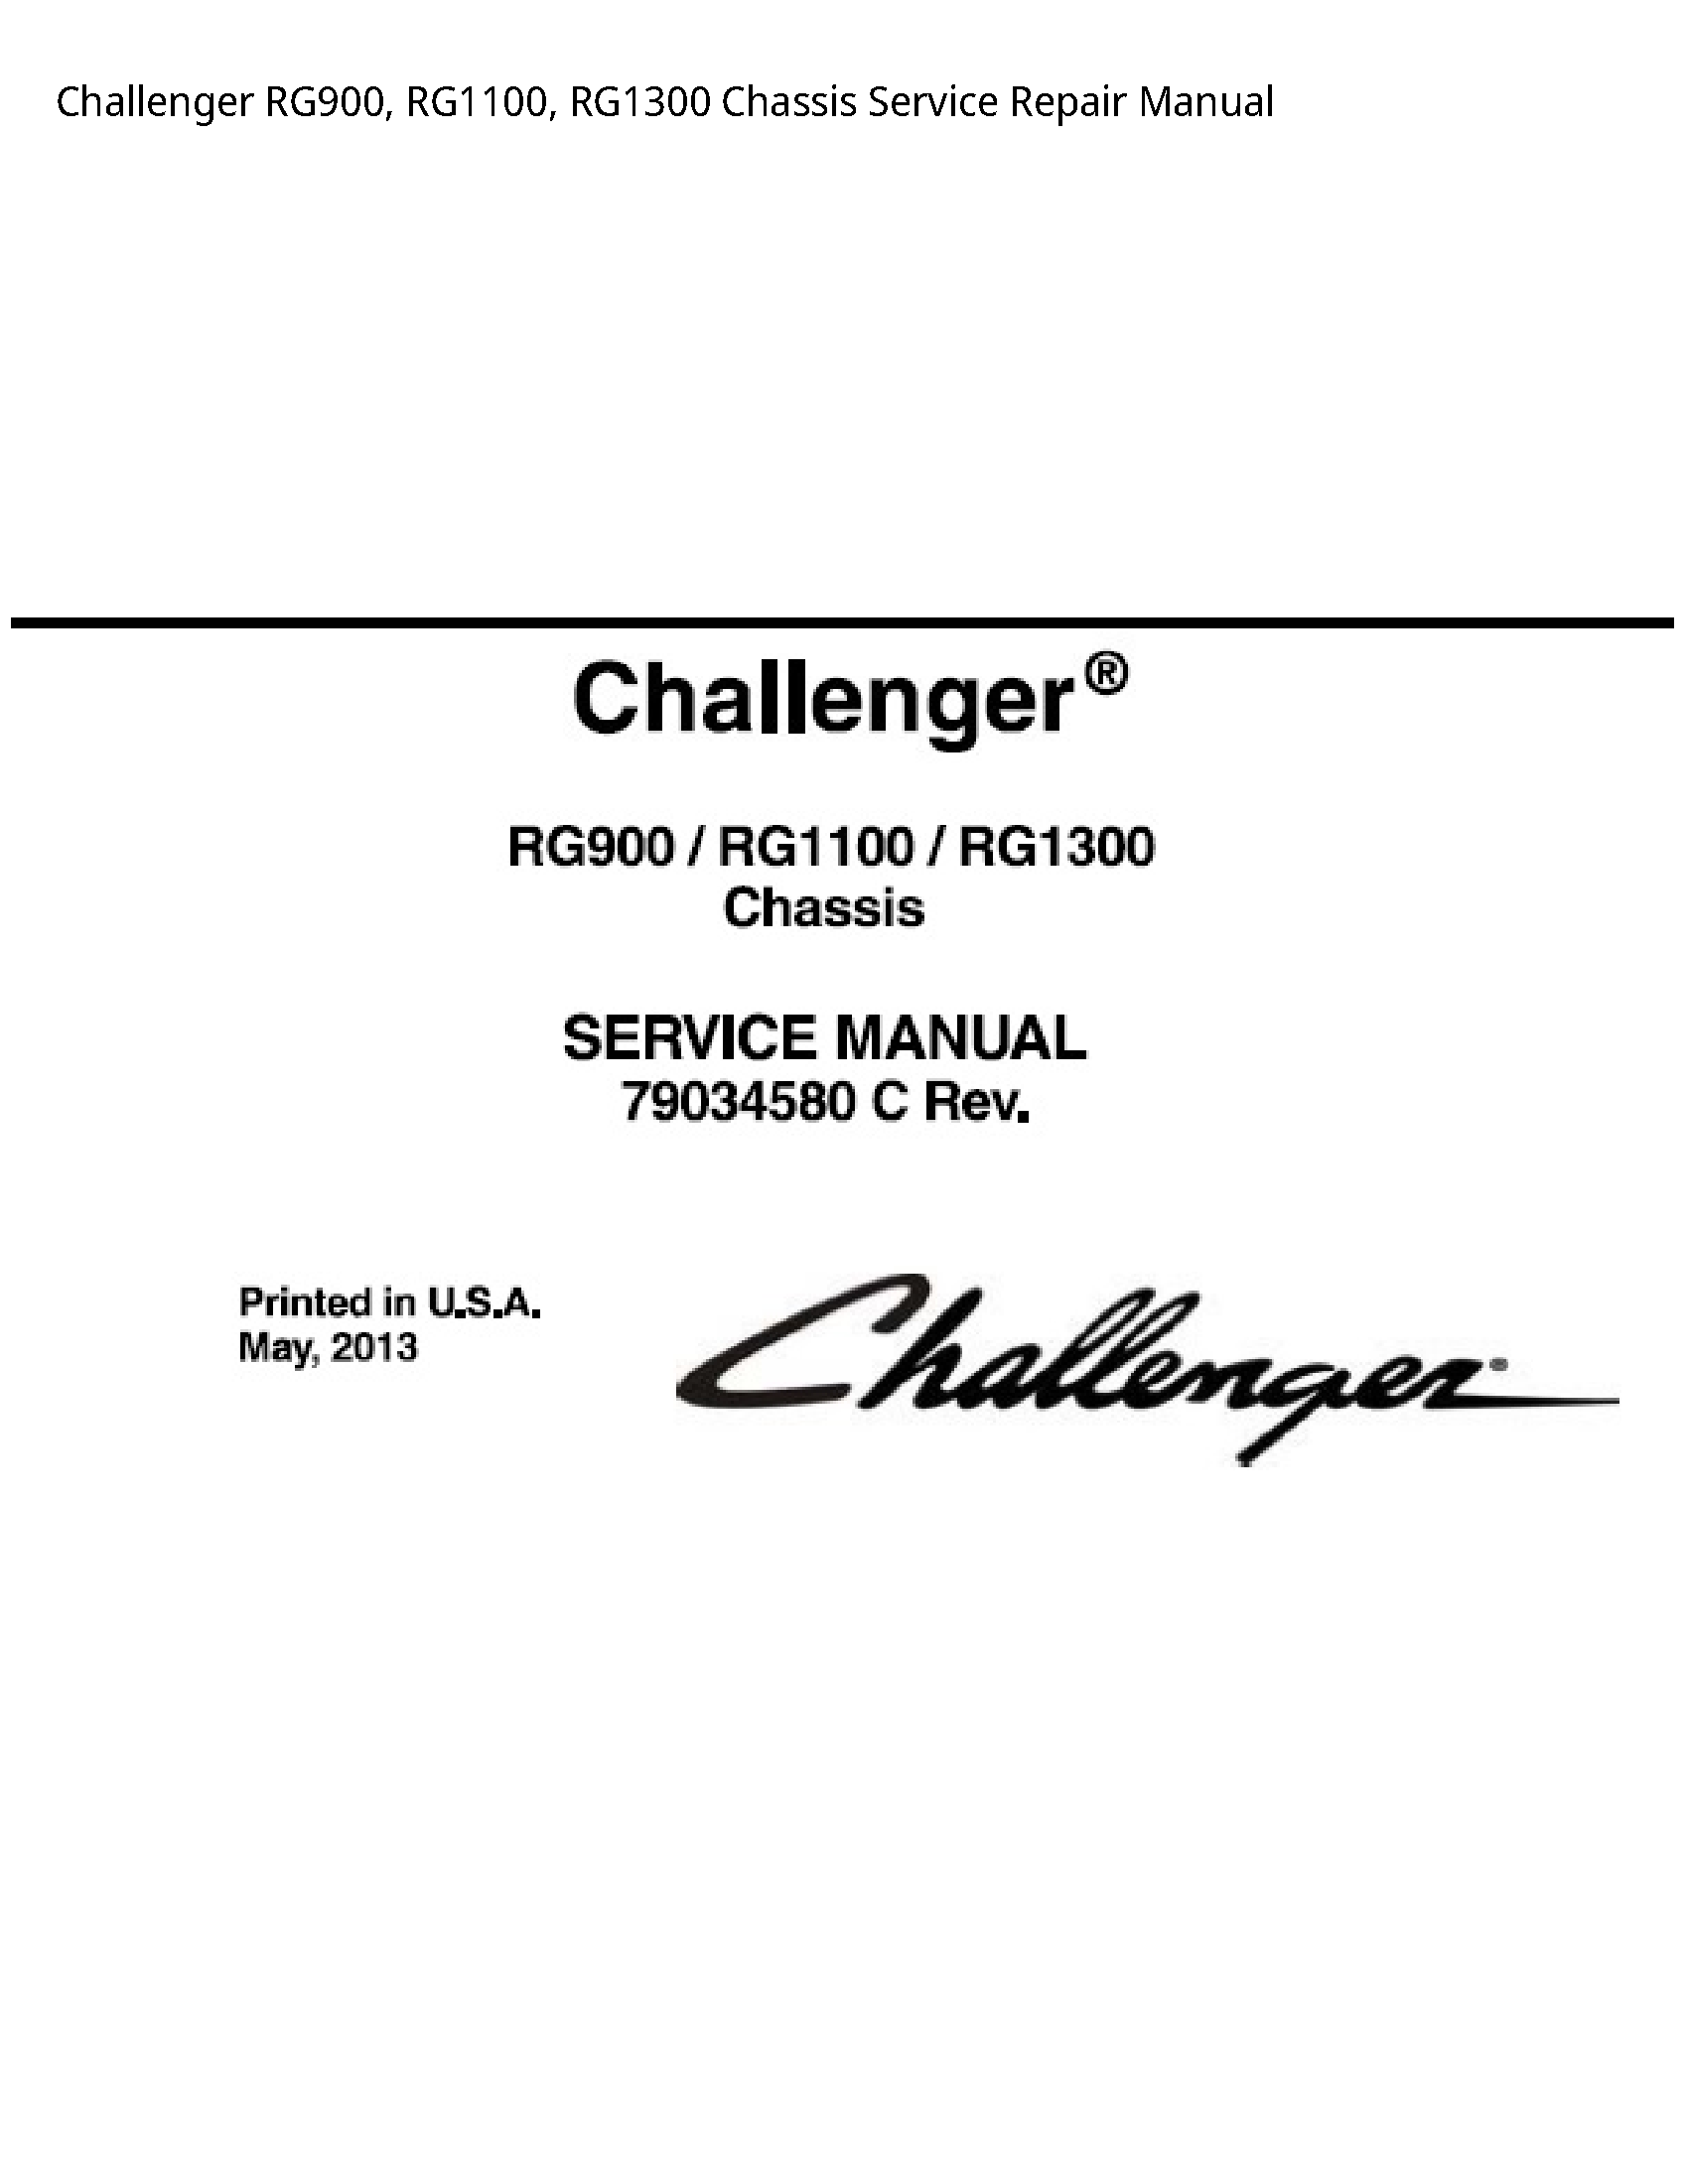 Challenger RG900 Chassis manual